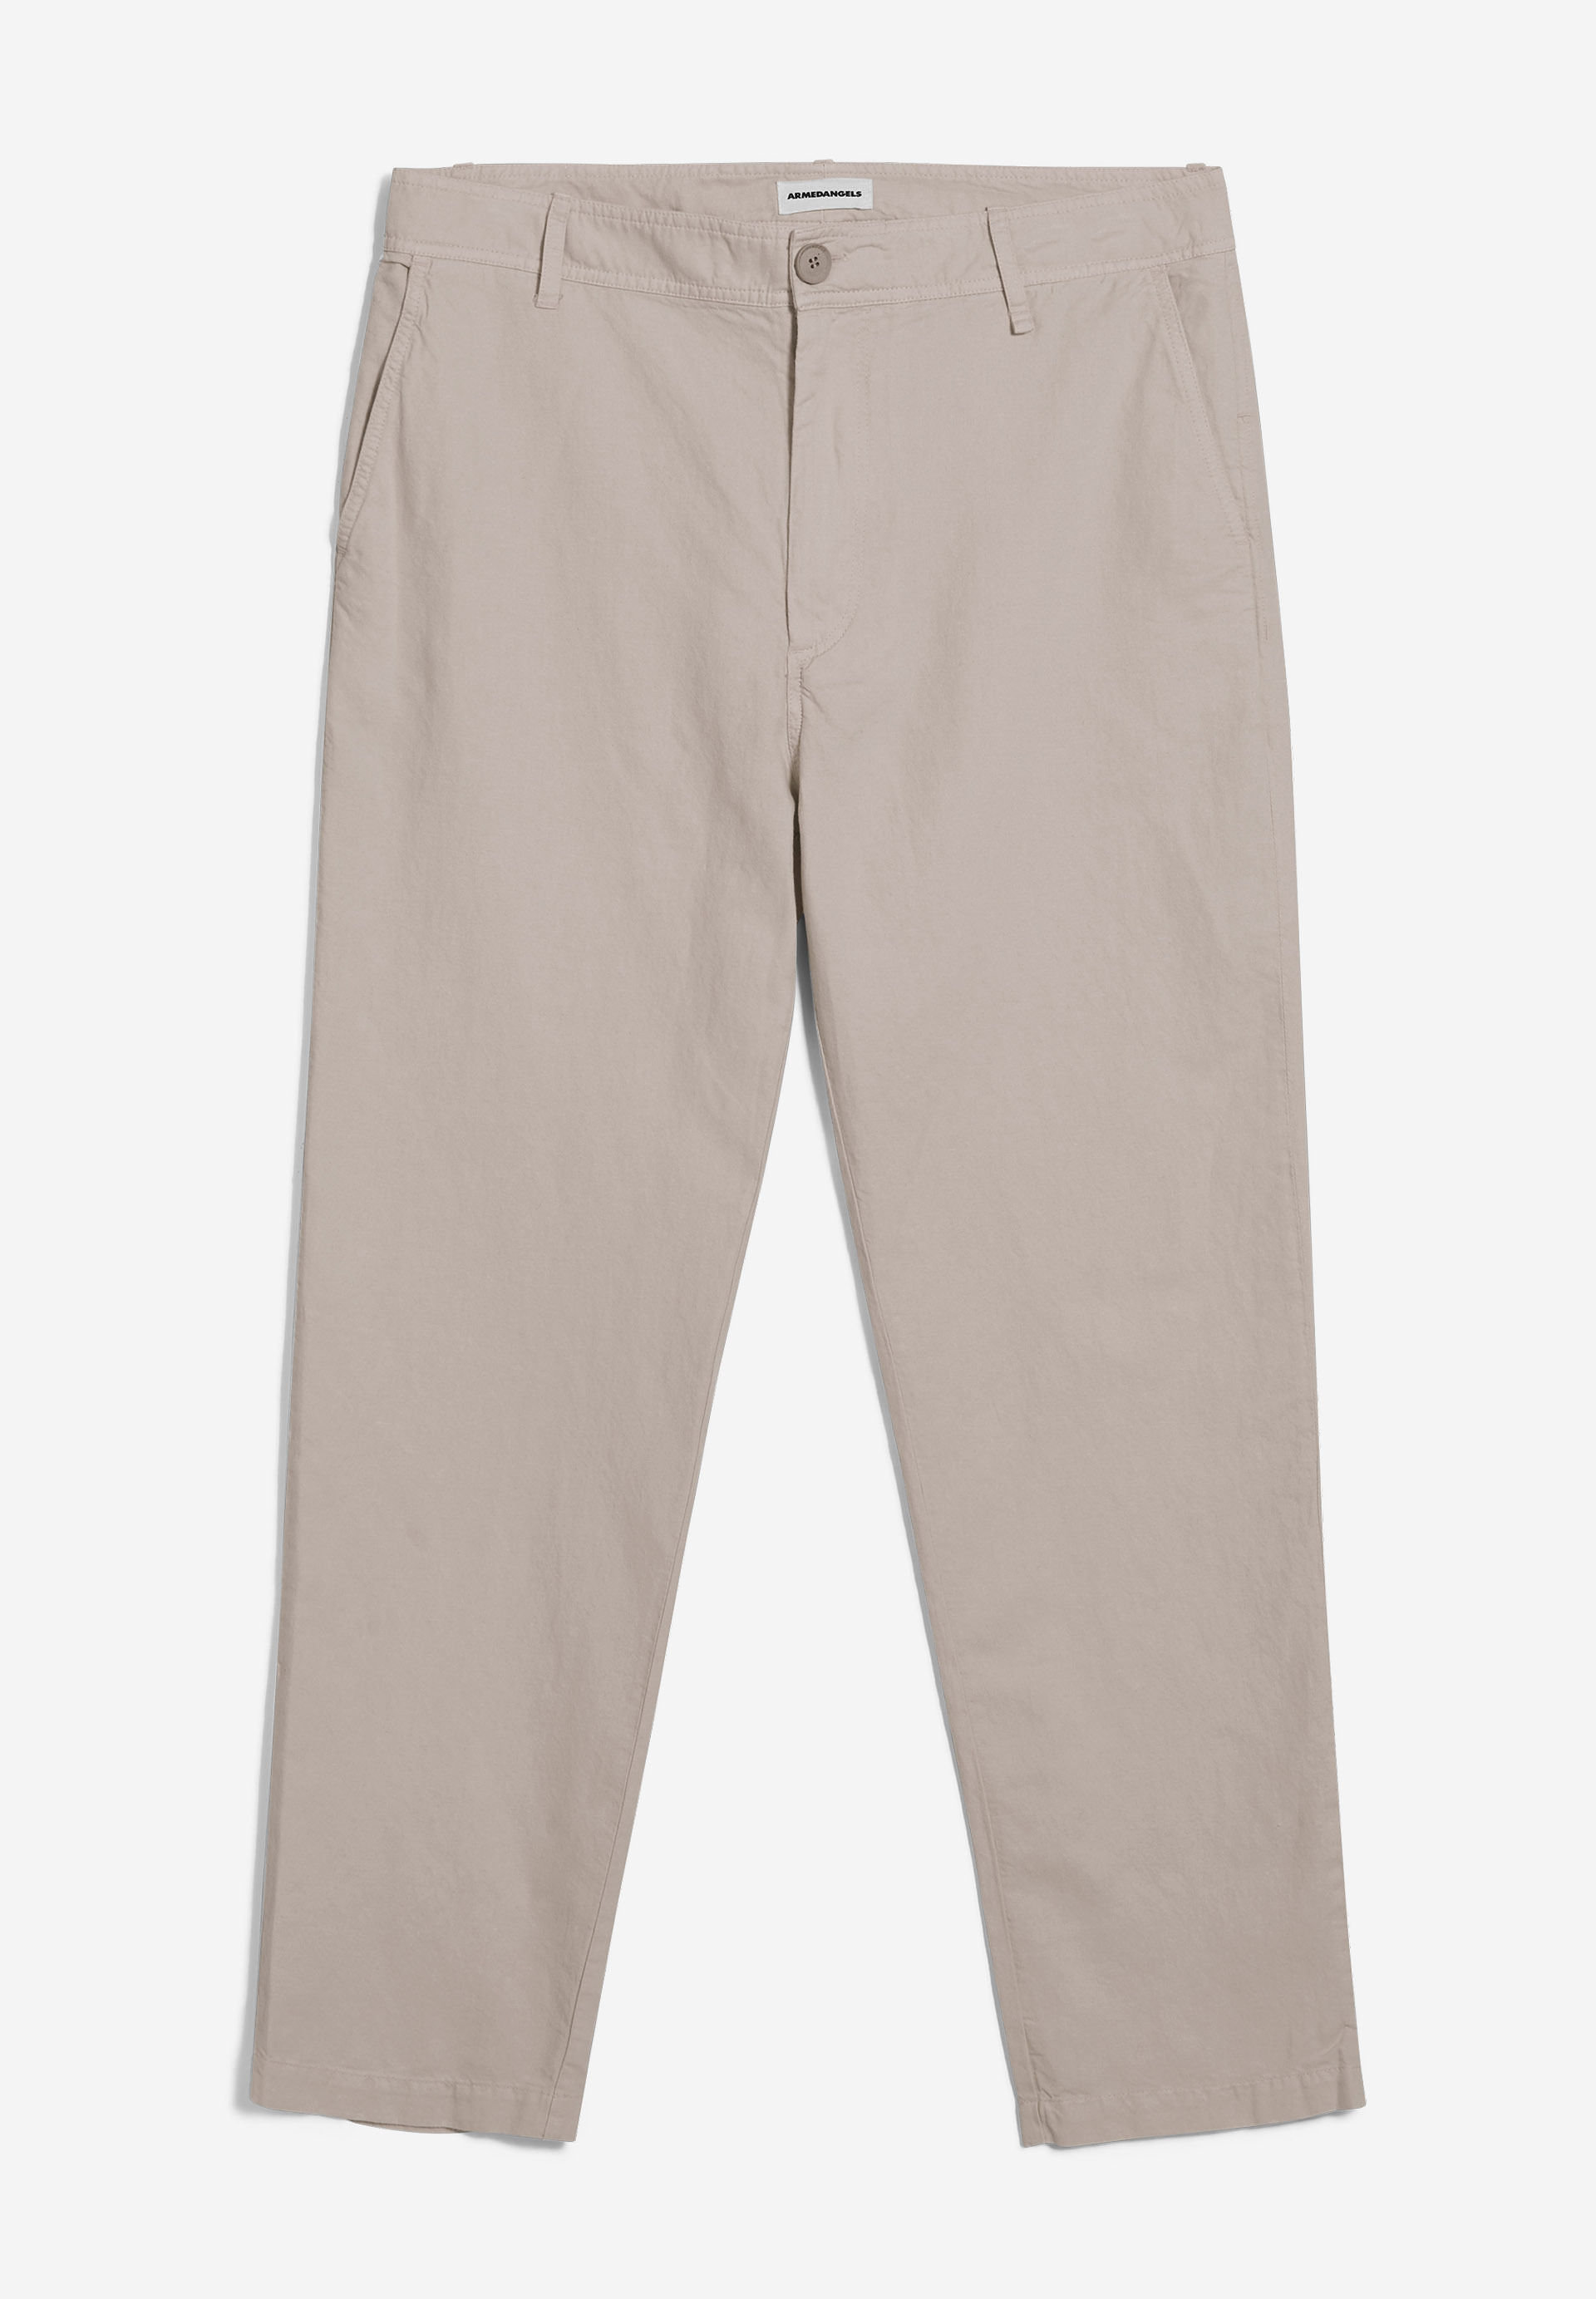 OTAAN LINO Pants Tapered Fit made of Linen Mix